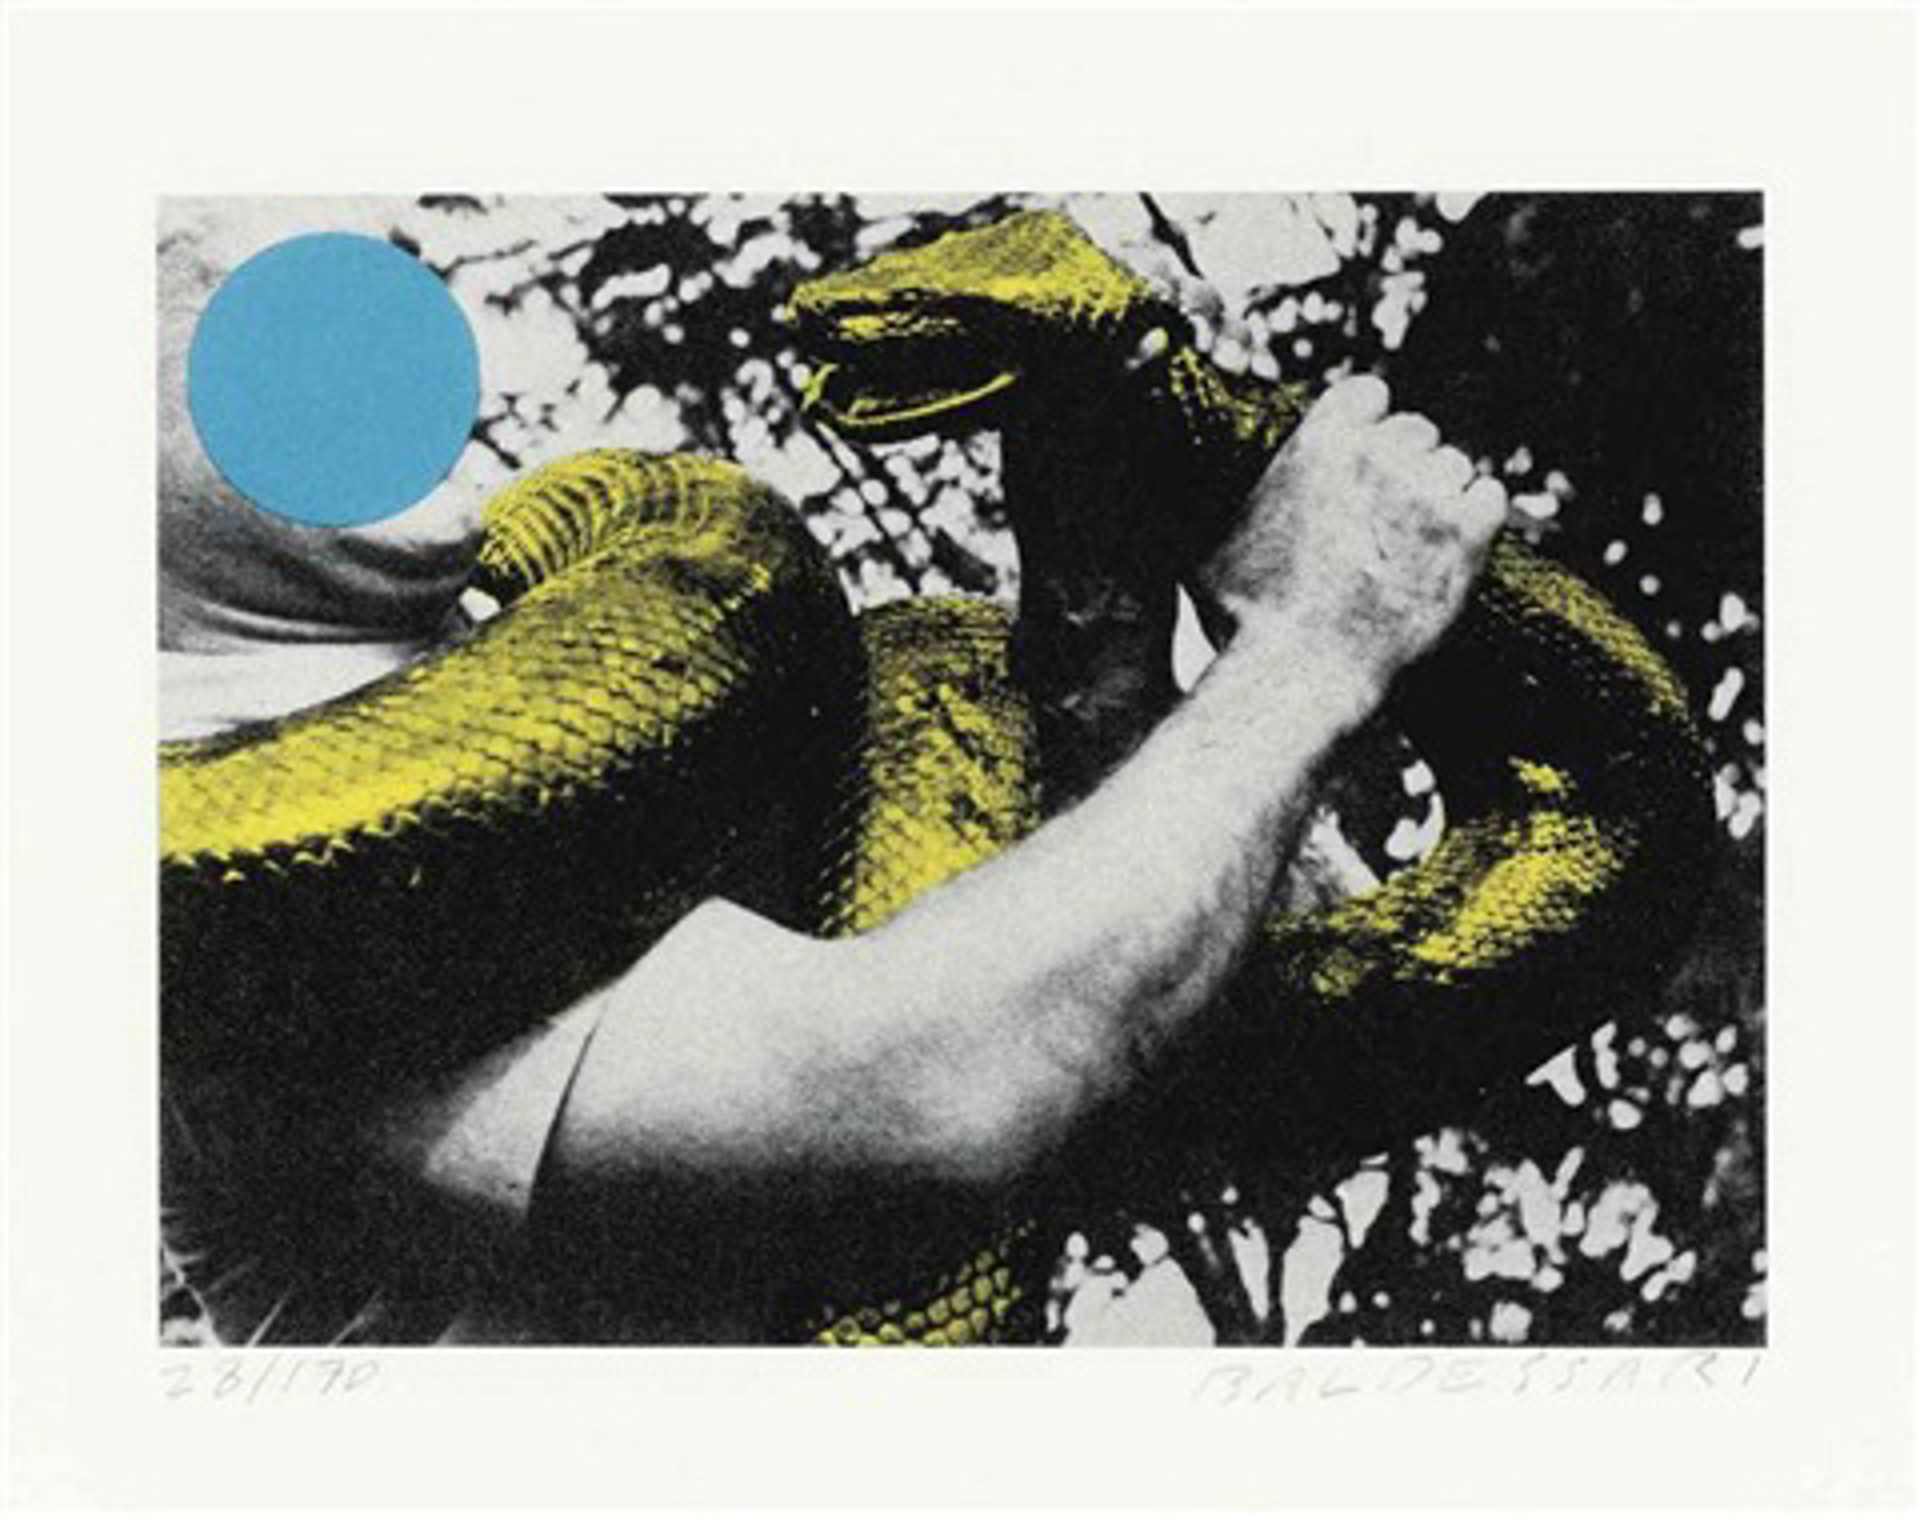 Man with Snake (Blue and Yellow) by John Baldessari